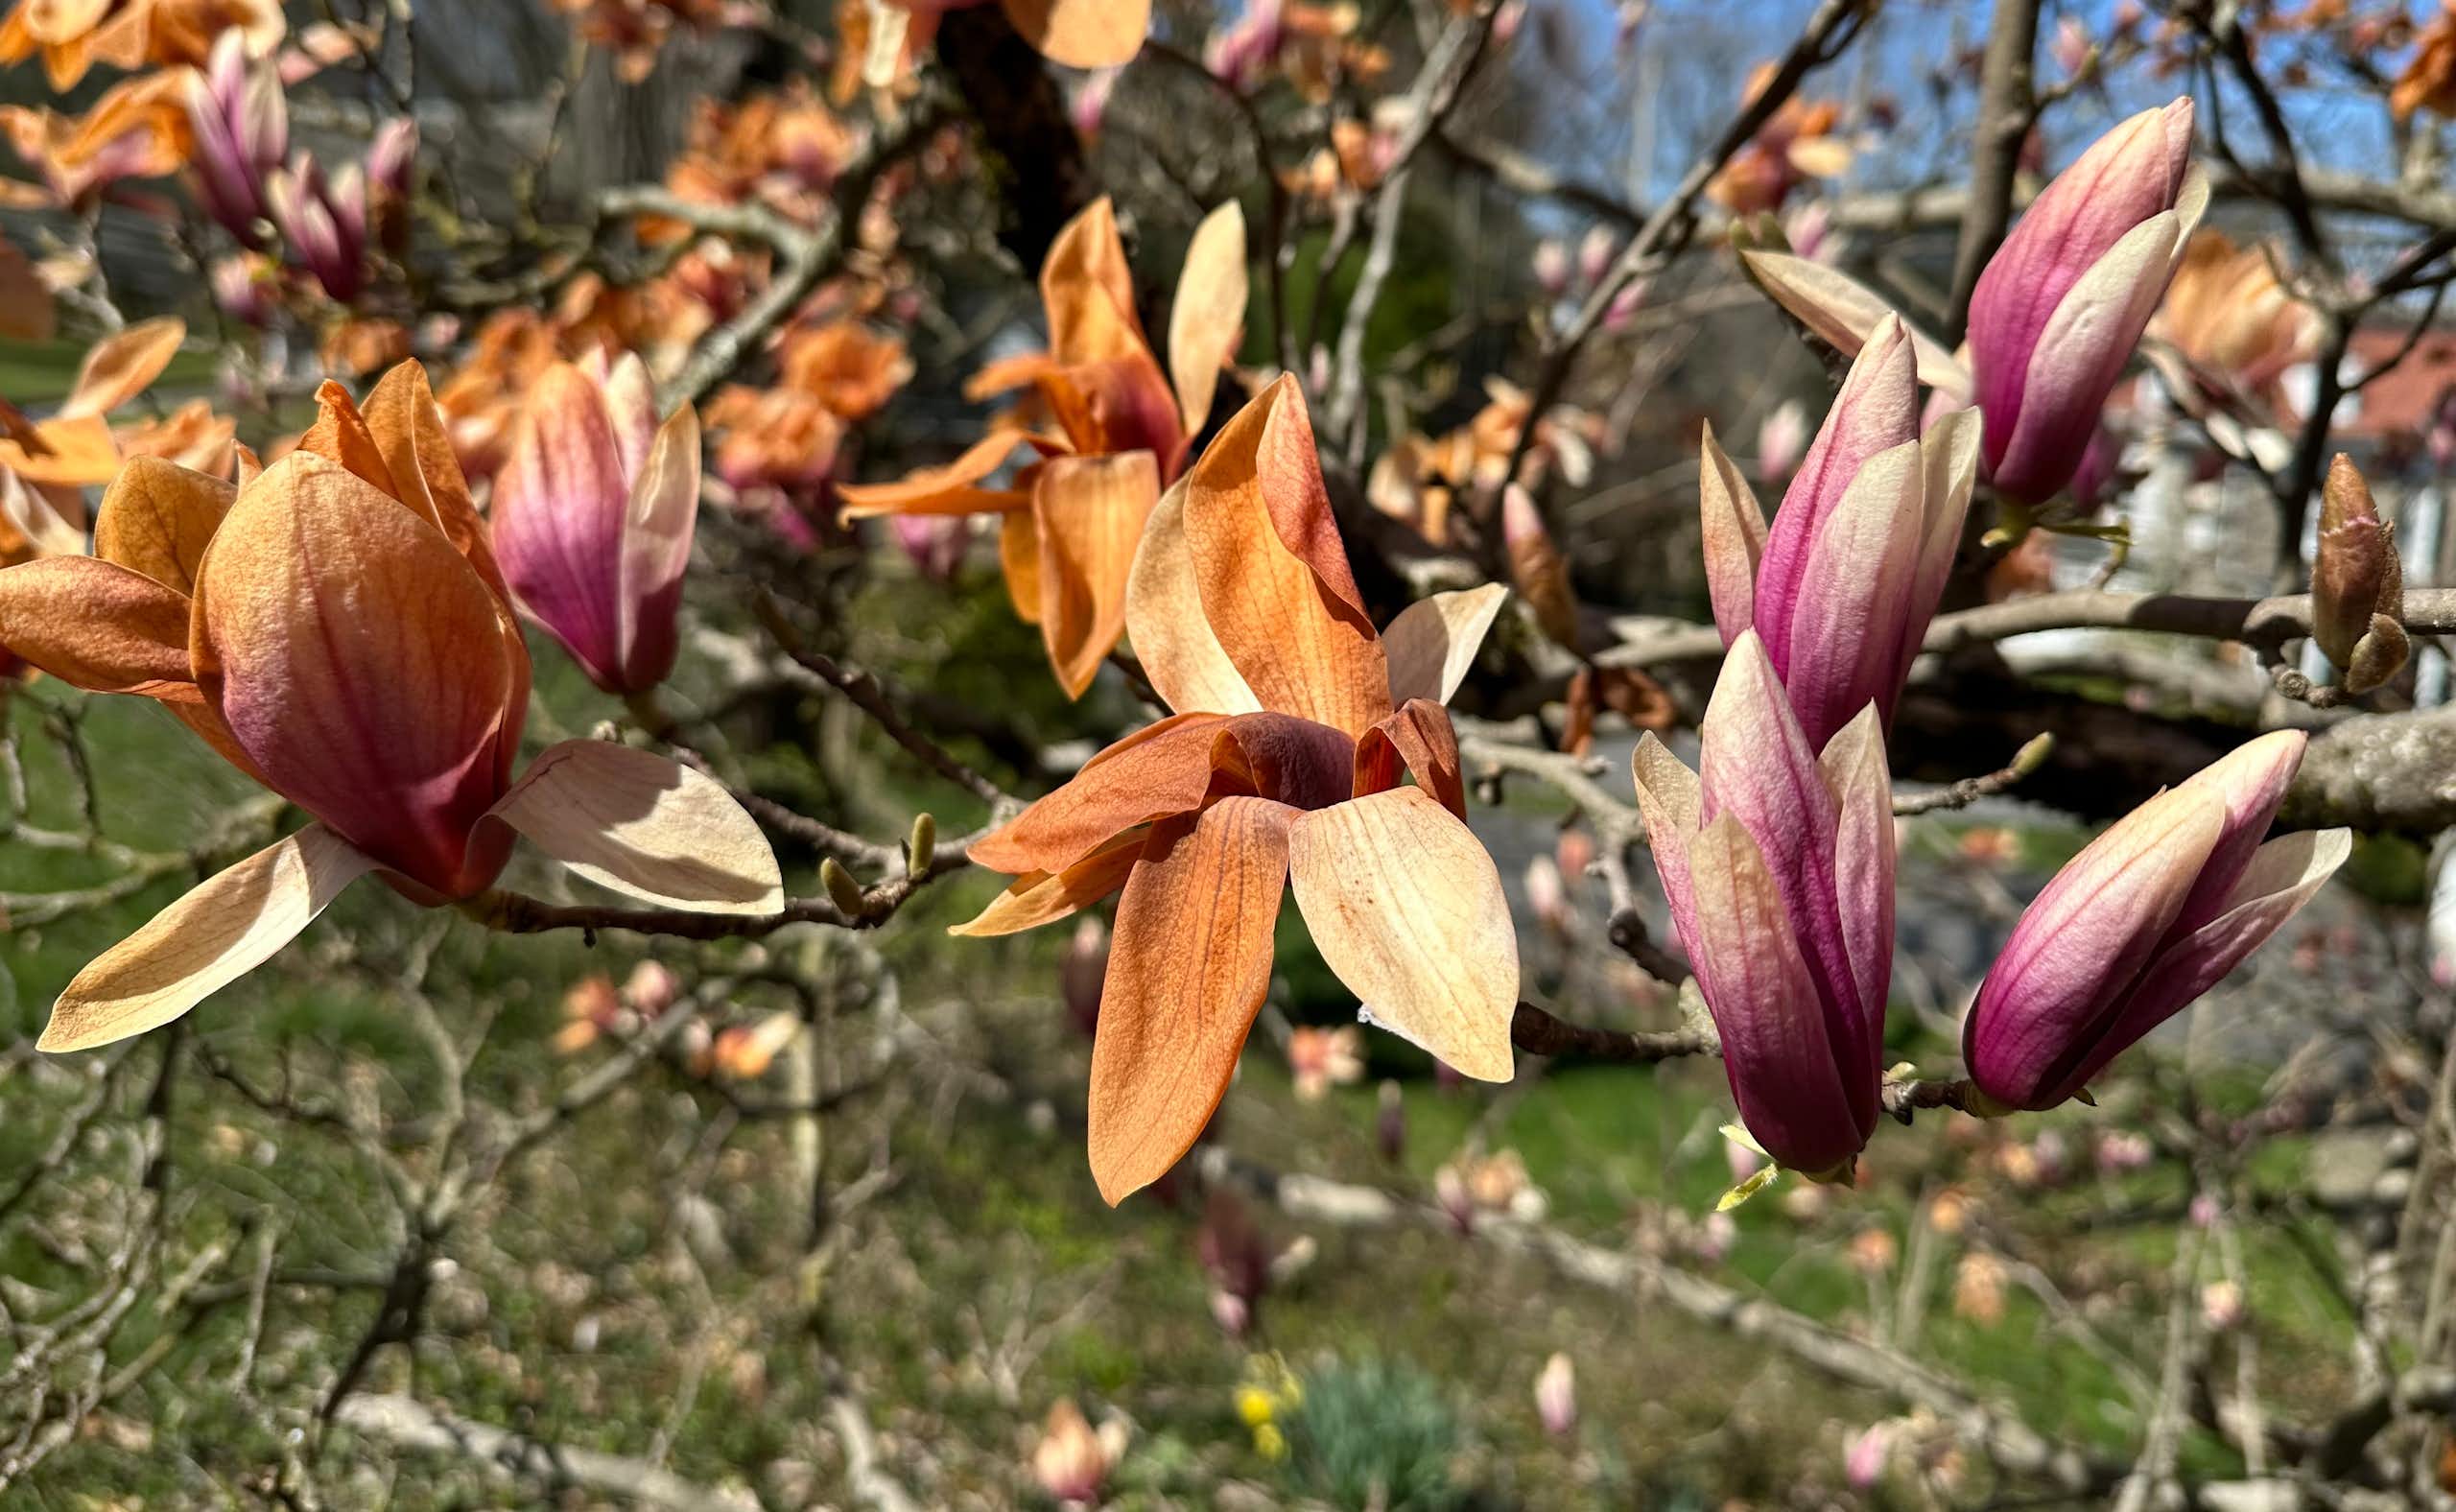 Branches of a magnolia tree with blooms that have turned brown and withered